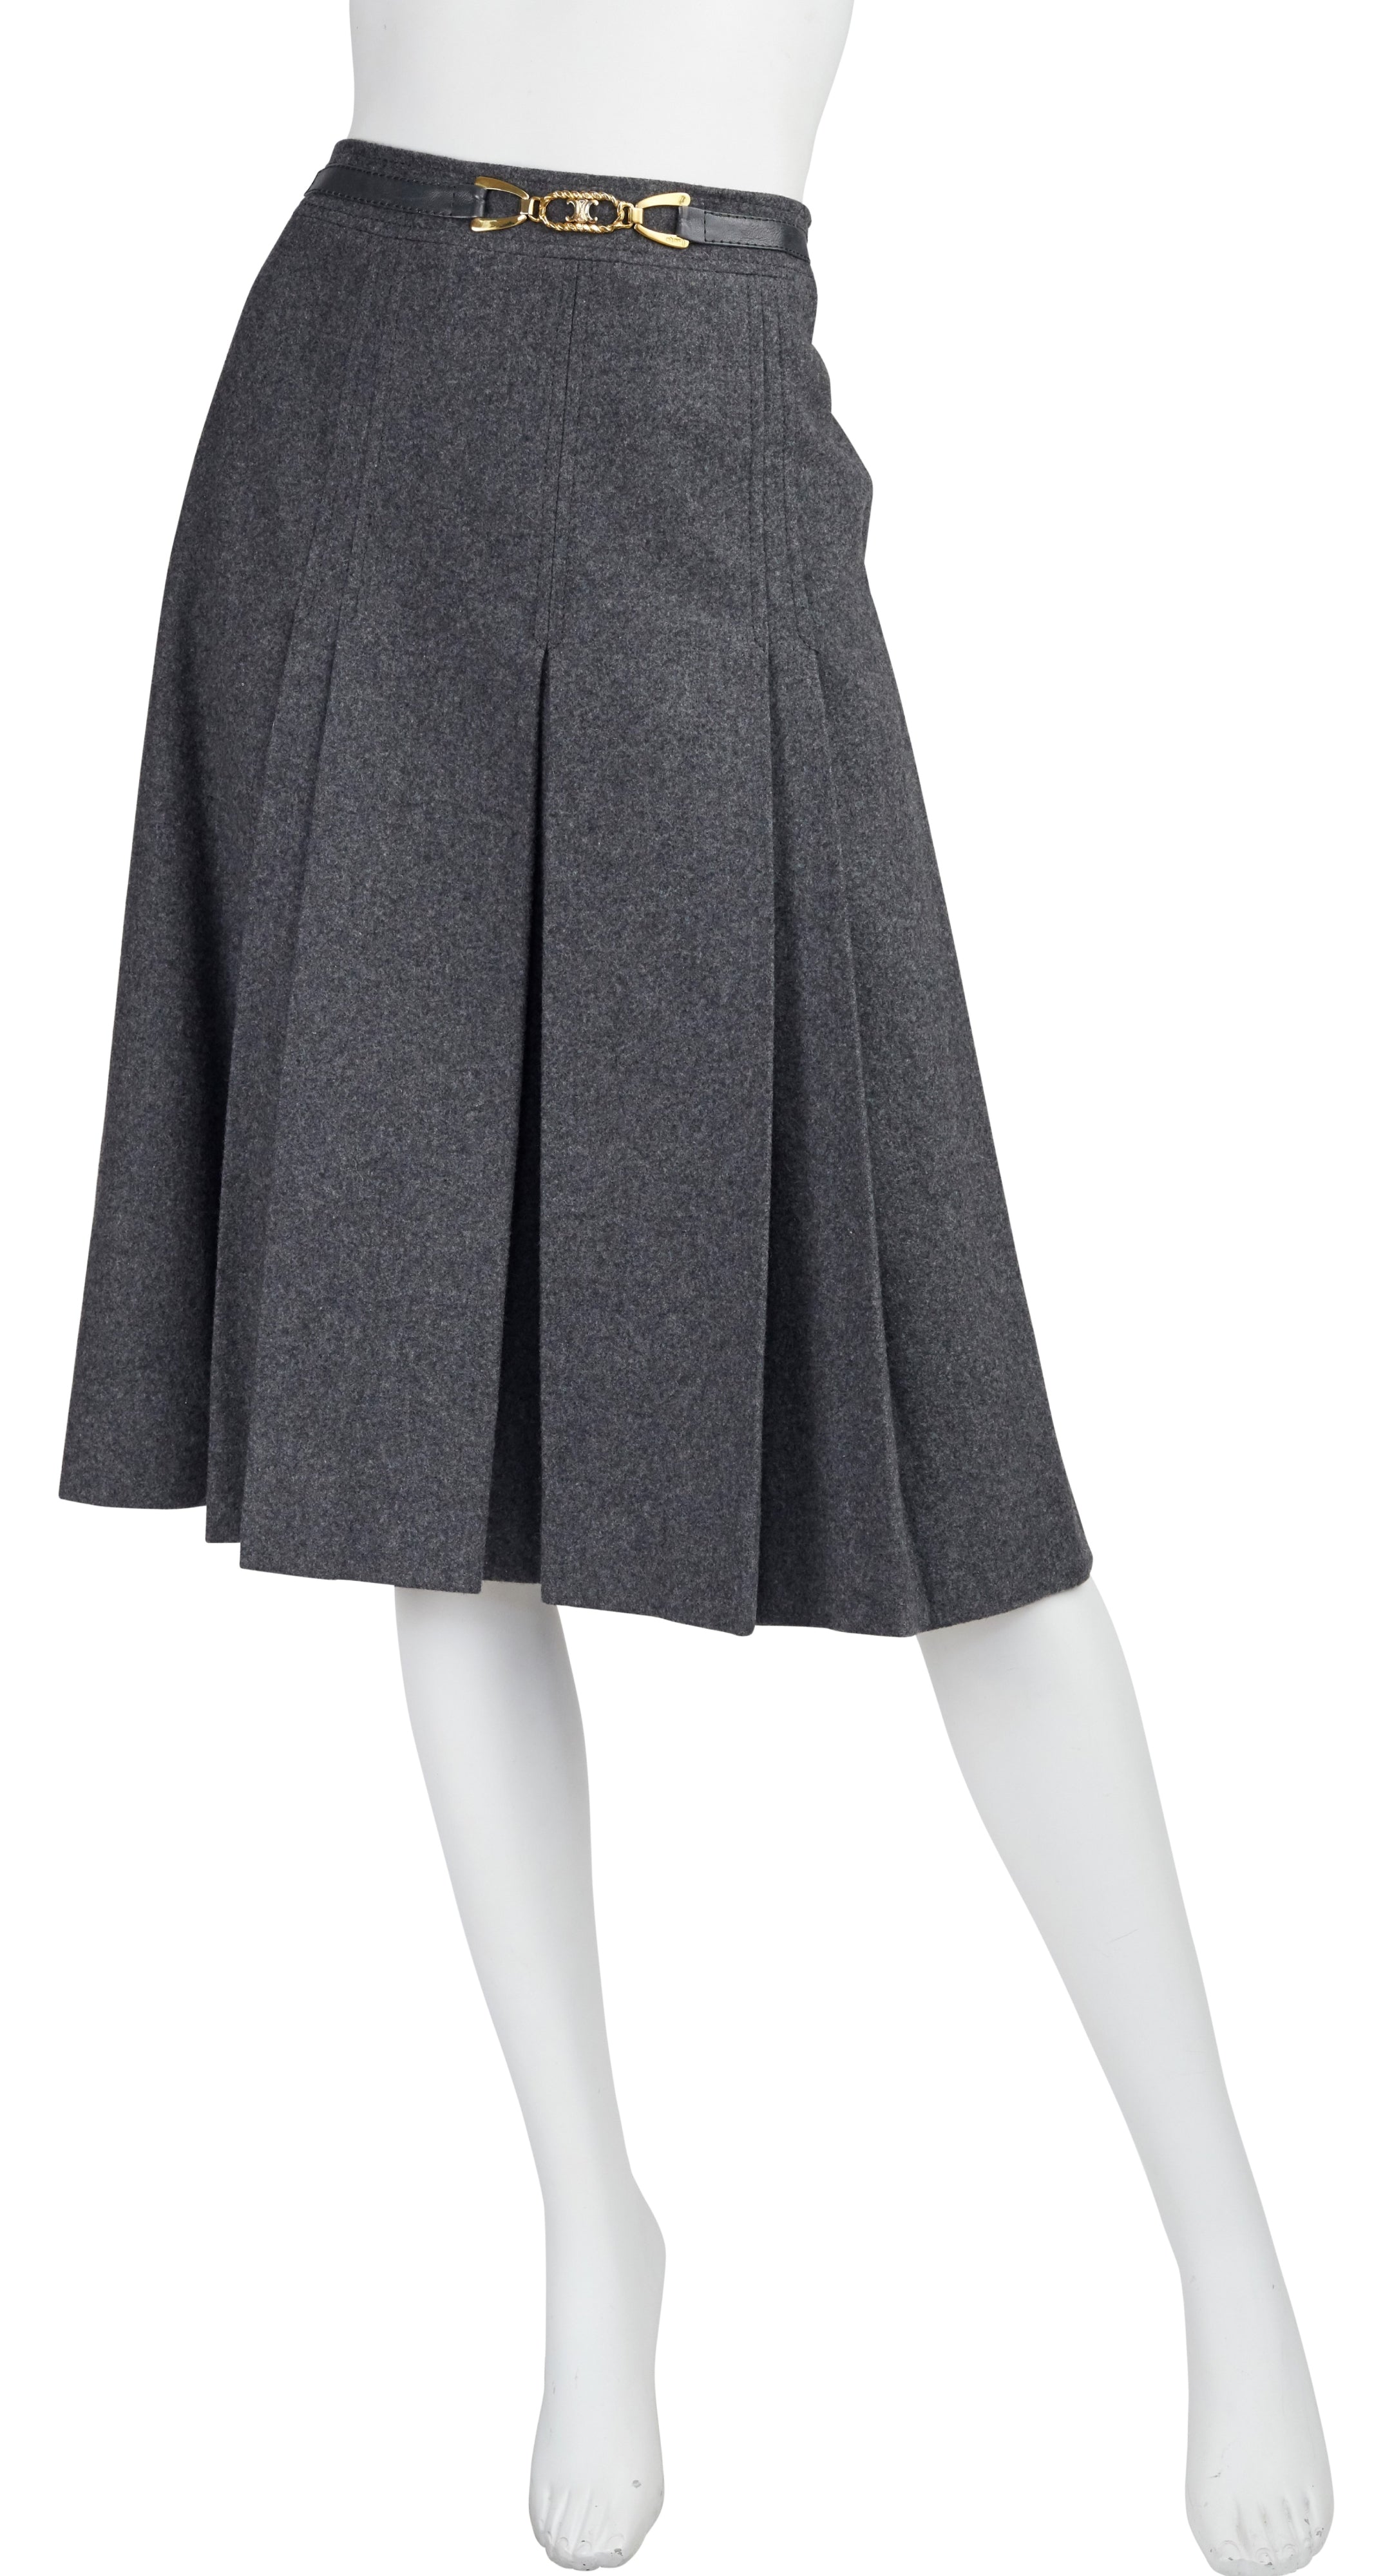 1970s Gold Buckle Gray Wool Pleated Skirt